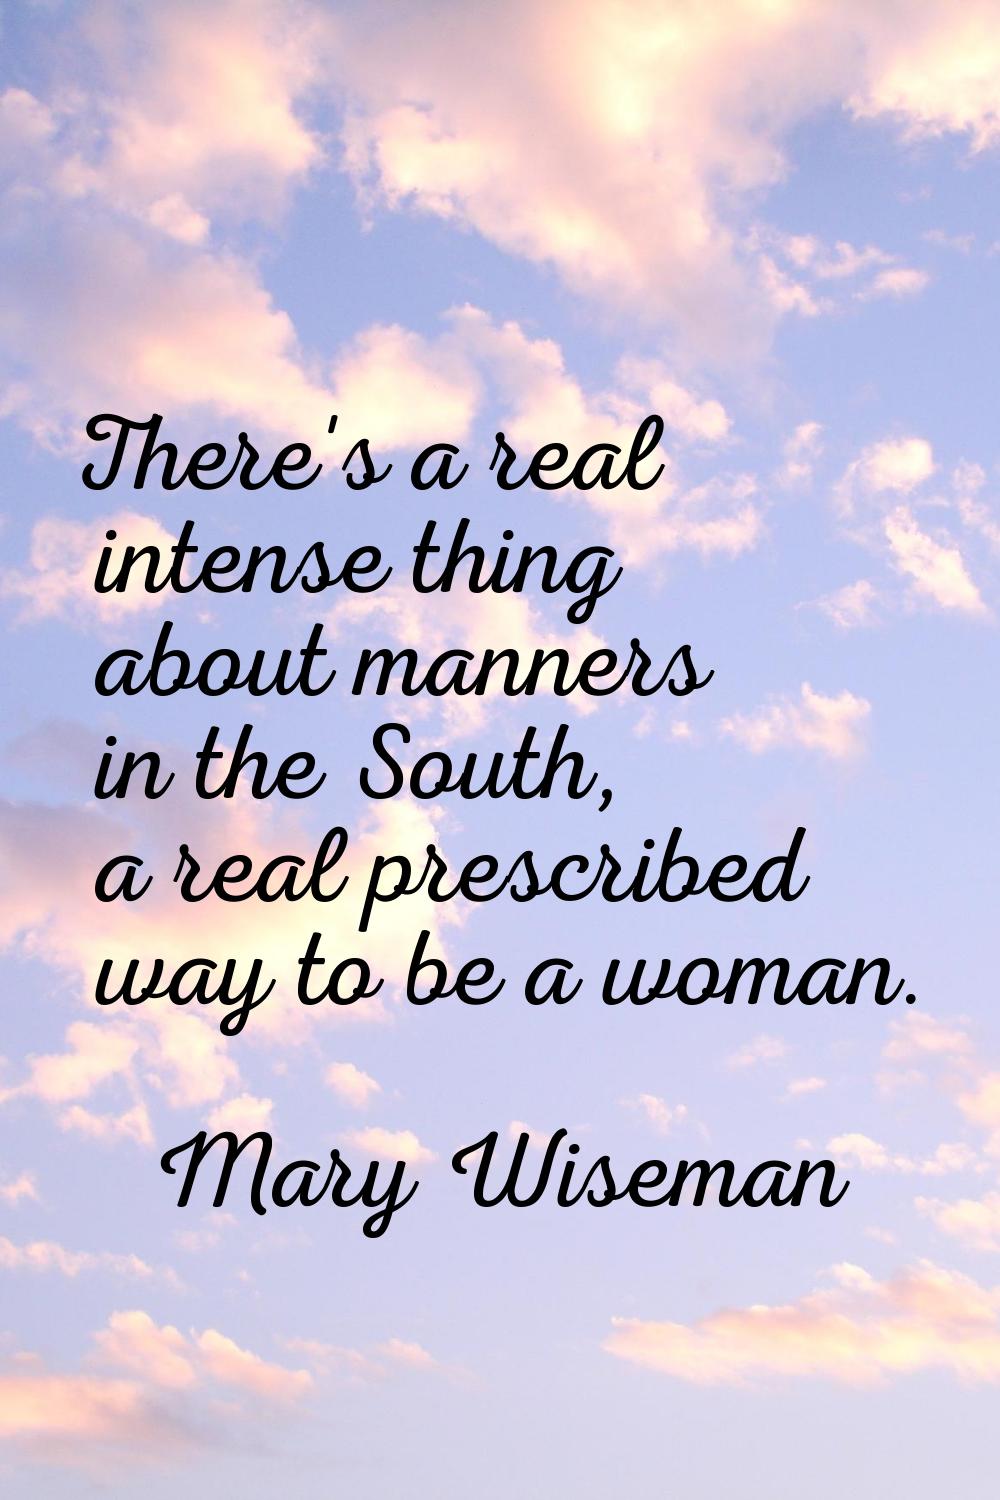 There's a real intense thing about manners in the South, a real prescribed way to be a woman.